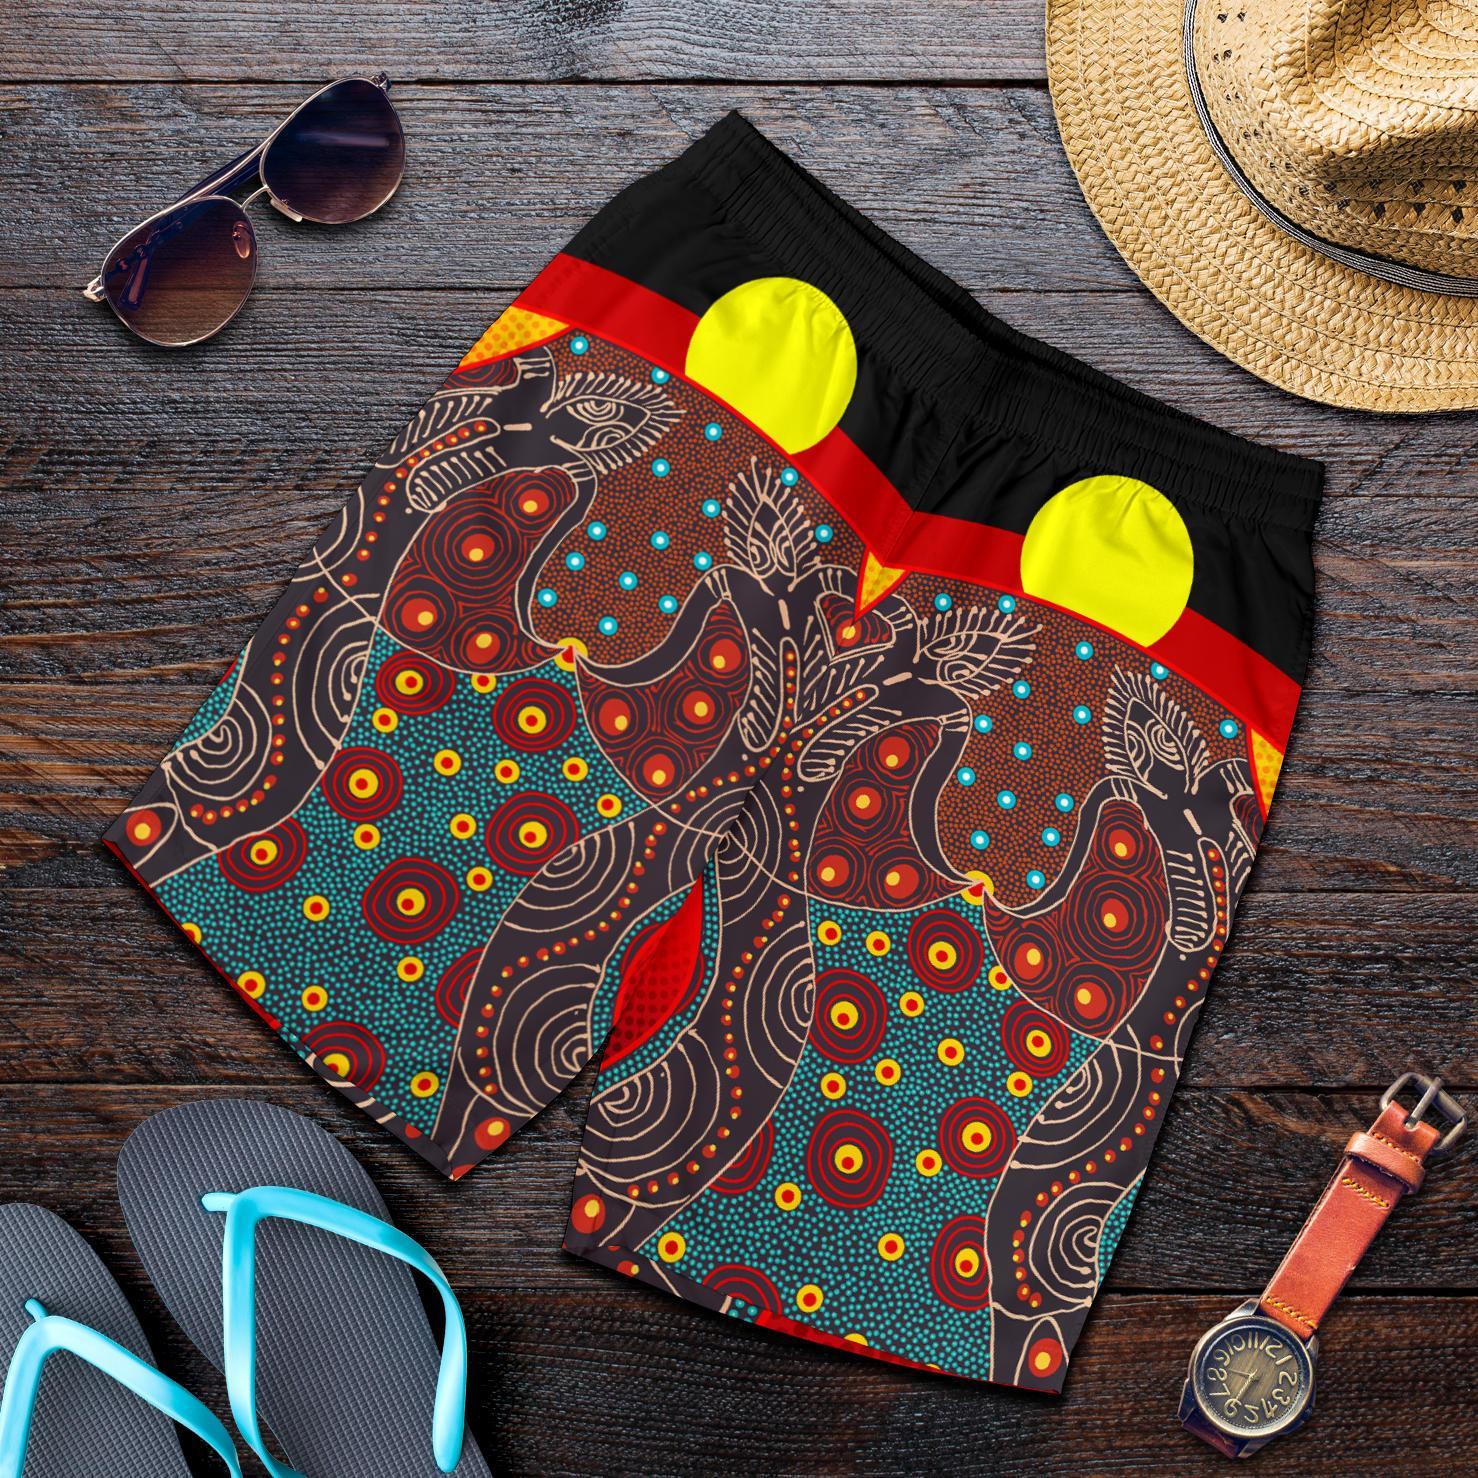 mens-short-aboriginal-sublimation-dot-pattern-style-red